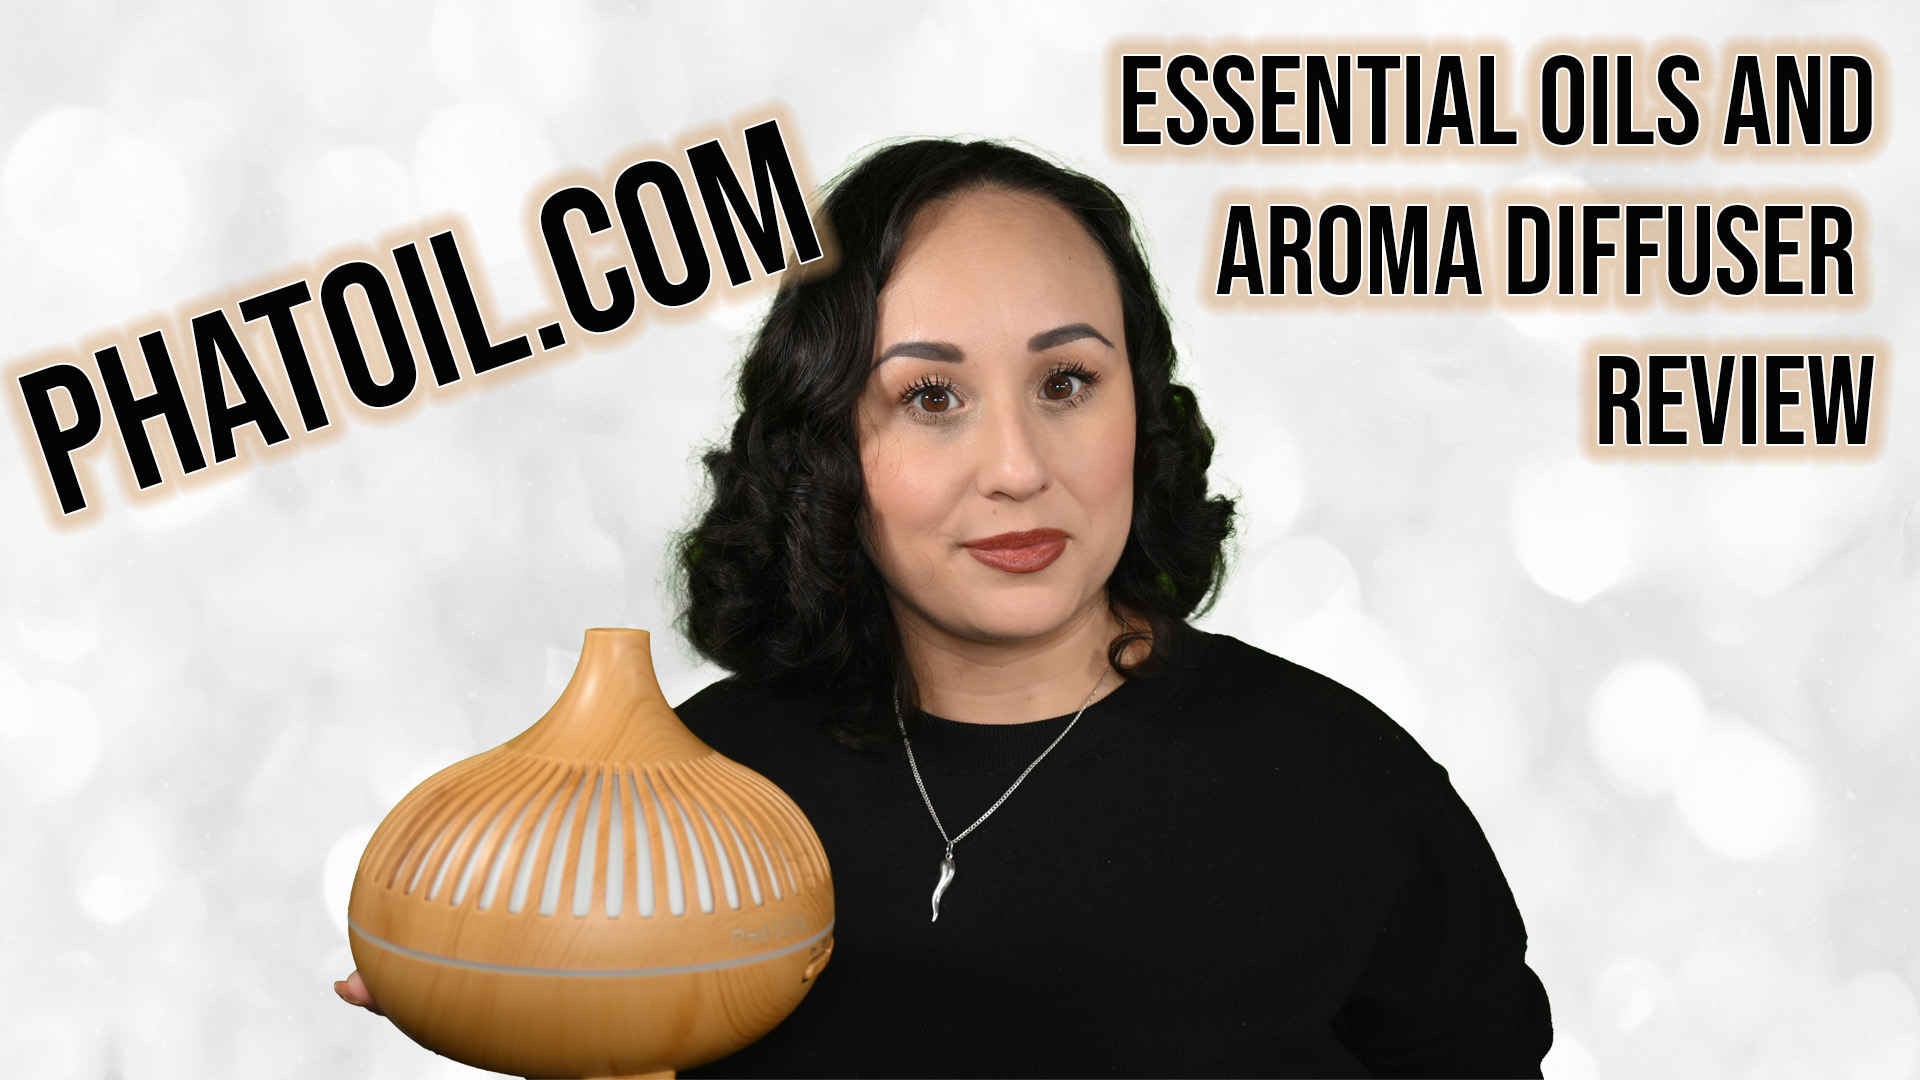 New Product Review: Phatoil Essential Oils and Aroma Diffuser Review